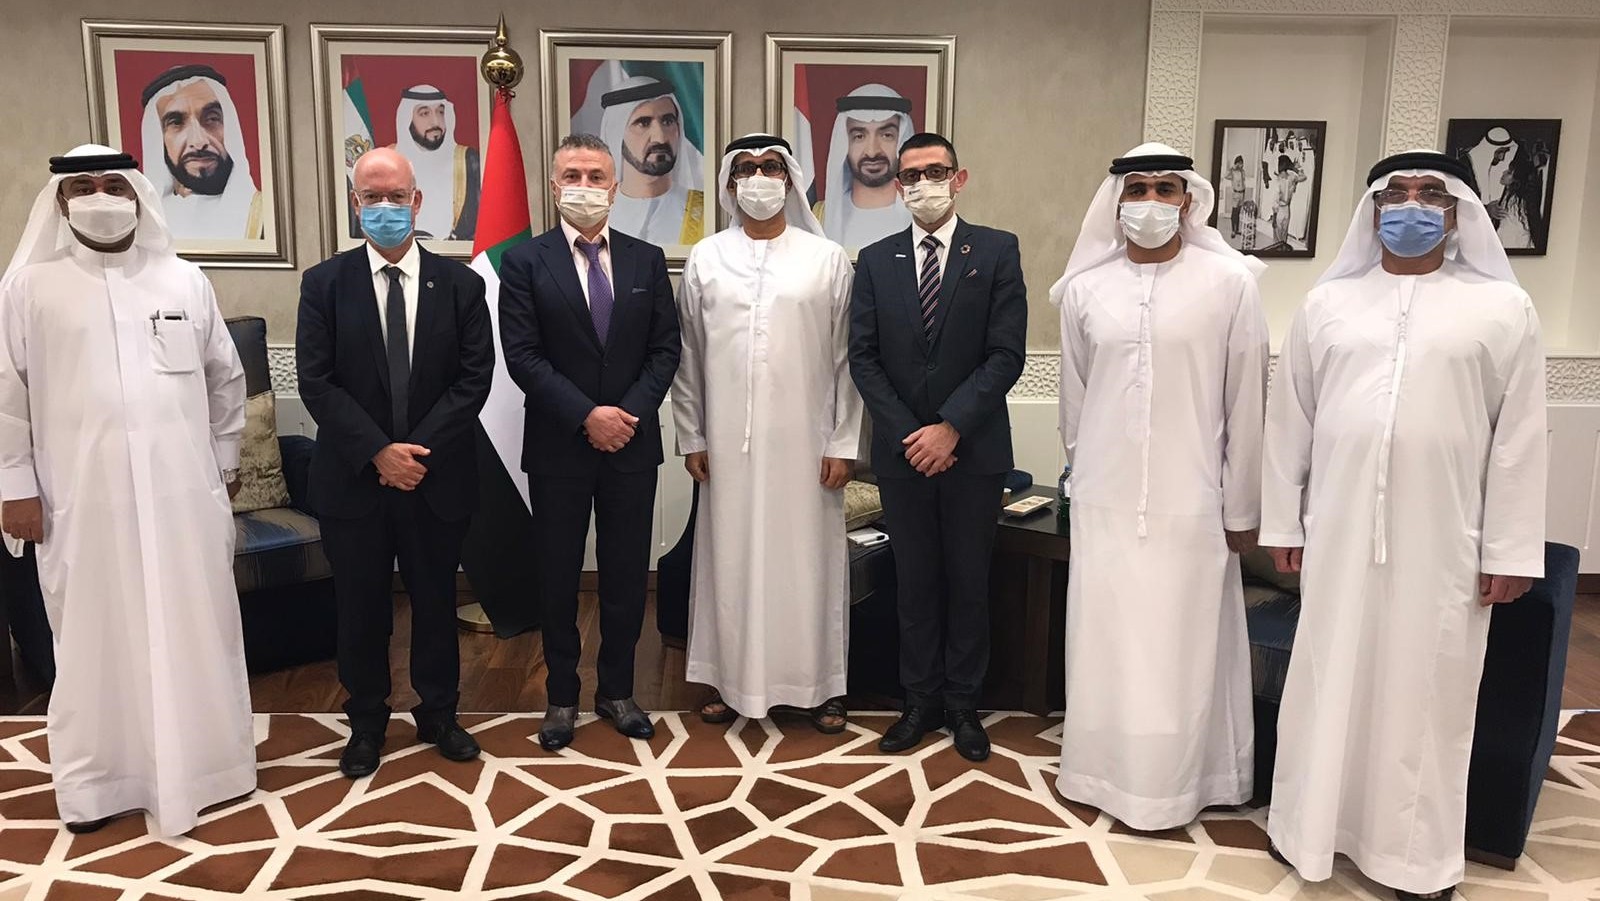 Tel Aviv University signed on as a partner in a new Israeli-Emirati Water Research Institute at a ceremony in Abu Dhabi, June 2021. Photo courtesy of TAU